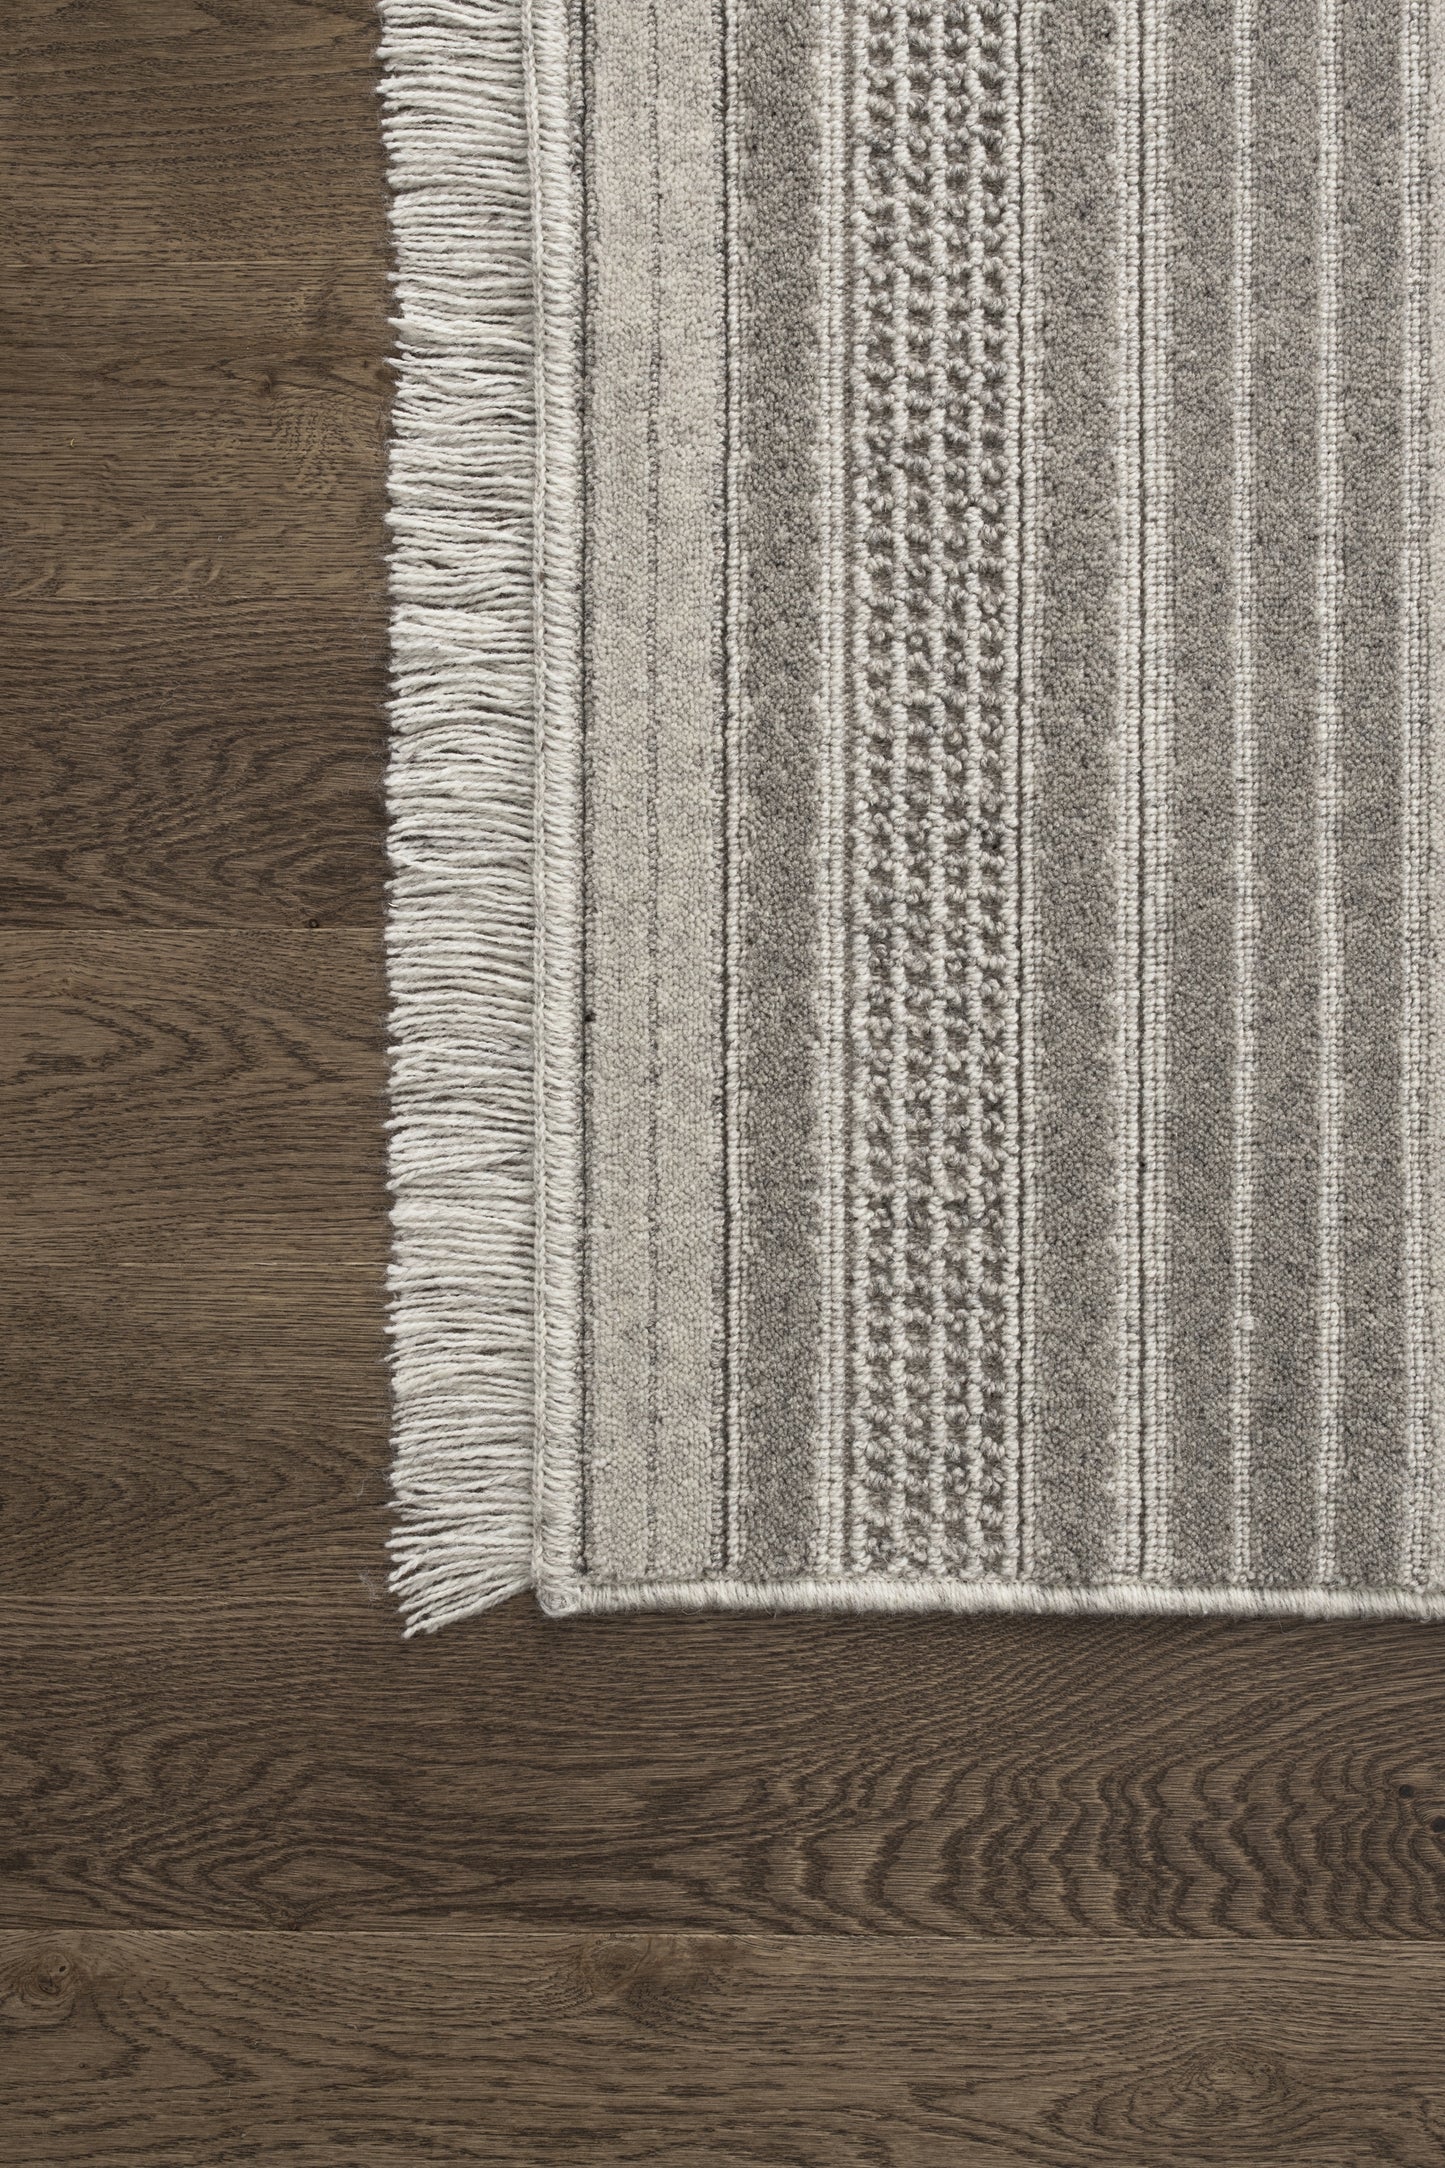 Agnella Rugs Noble ONI Light Grey - 100% Undyed British Wool - Free Delivery